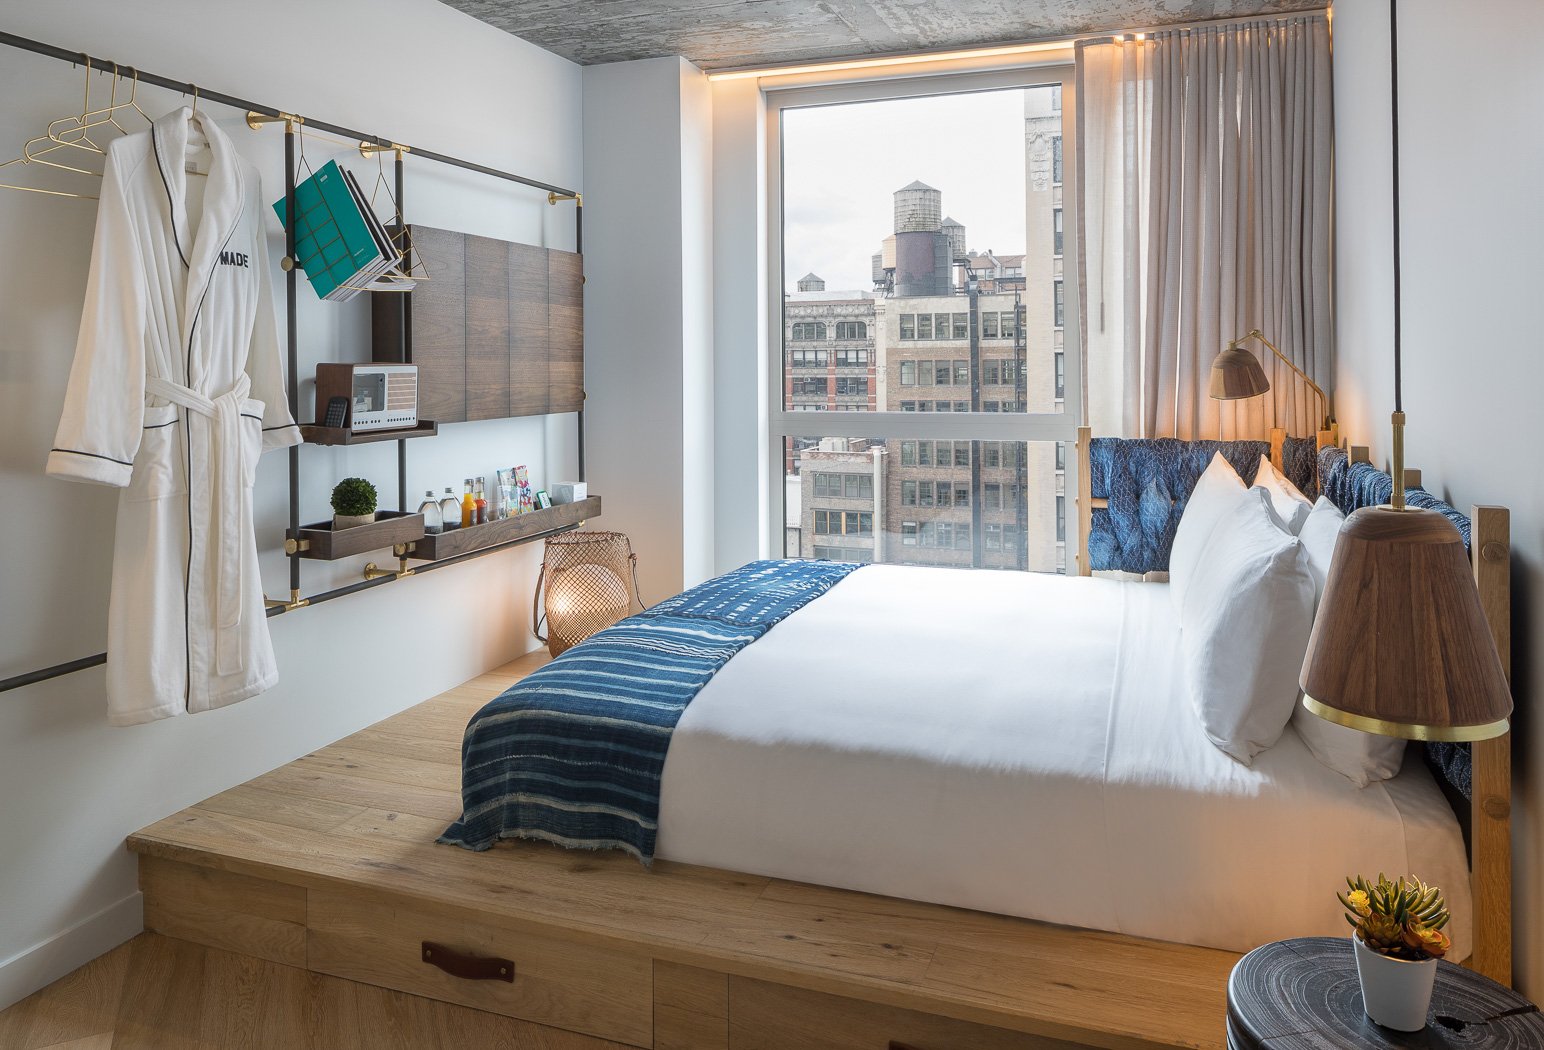 Leesa beds are used in New York Citys Made Hotel